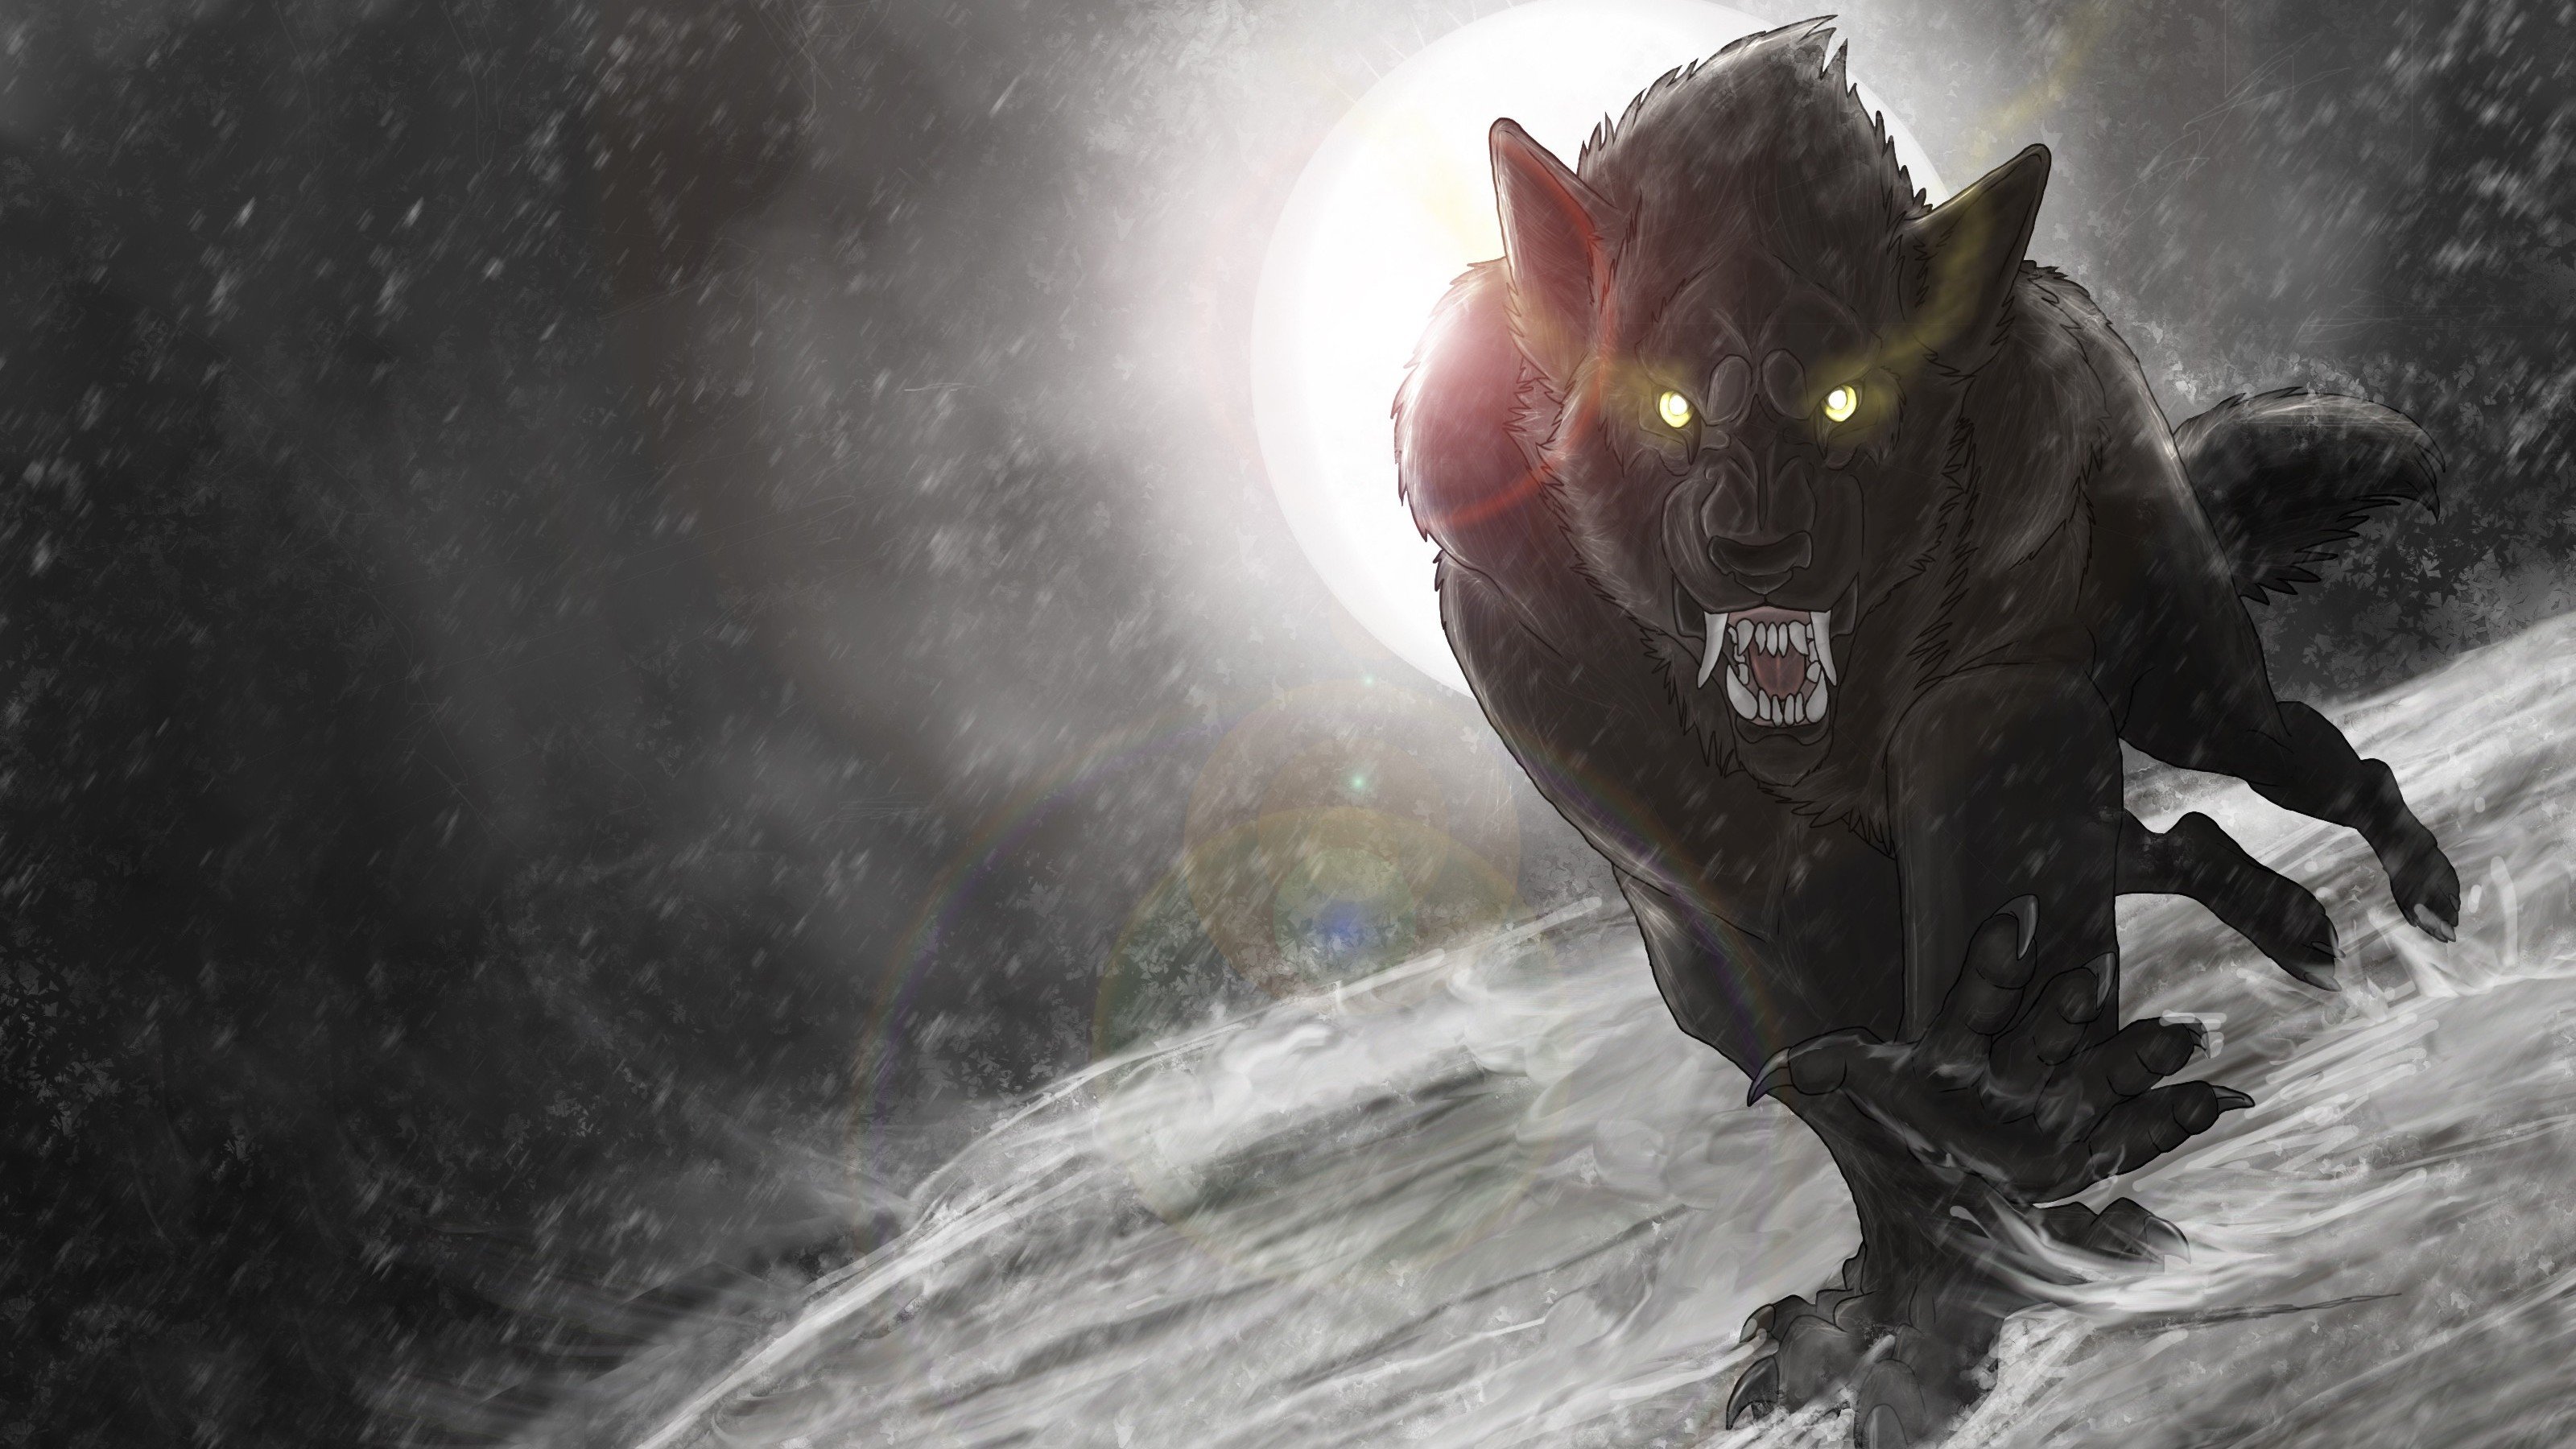 Werewolf 4k Wallpaper For Your Desktop Or Mobile Screen And